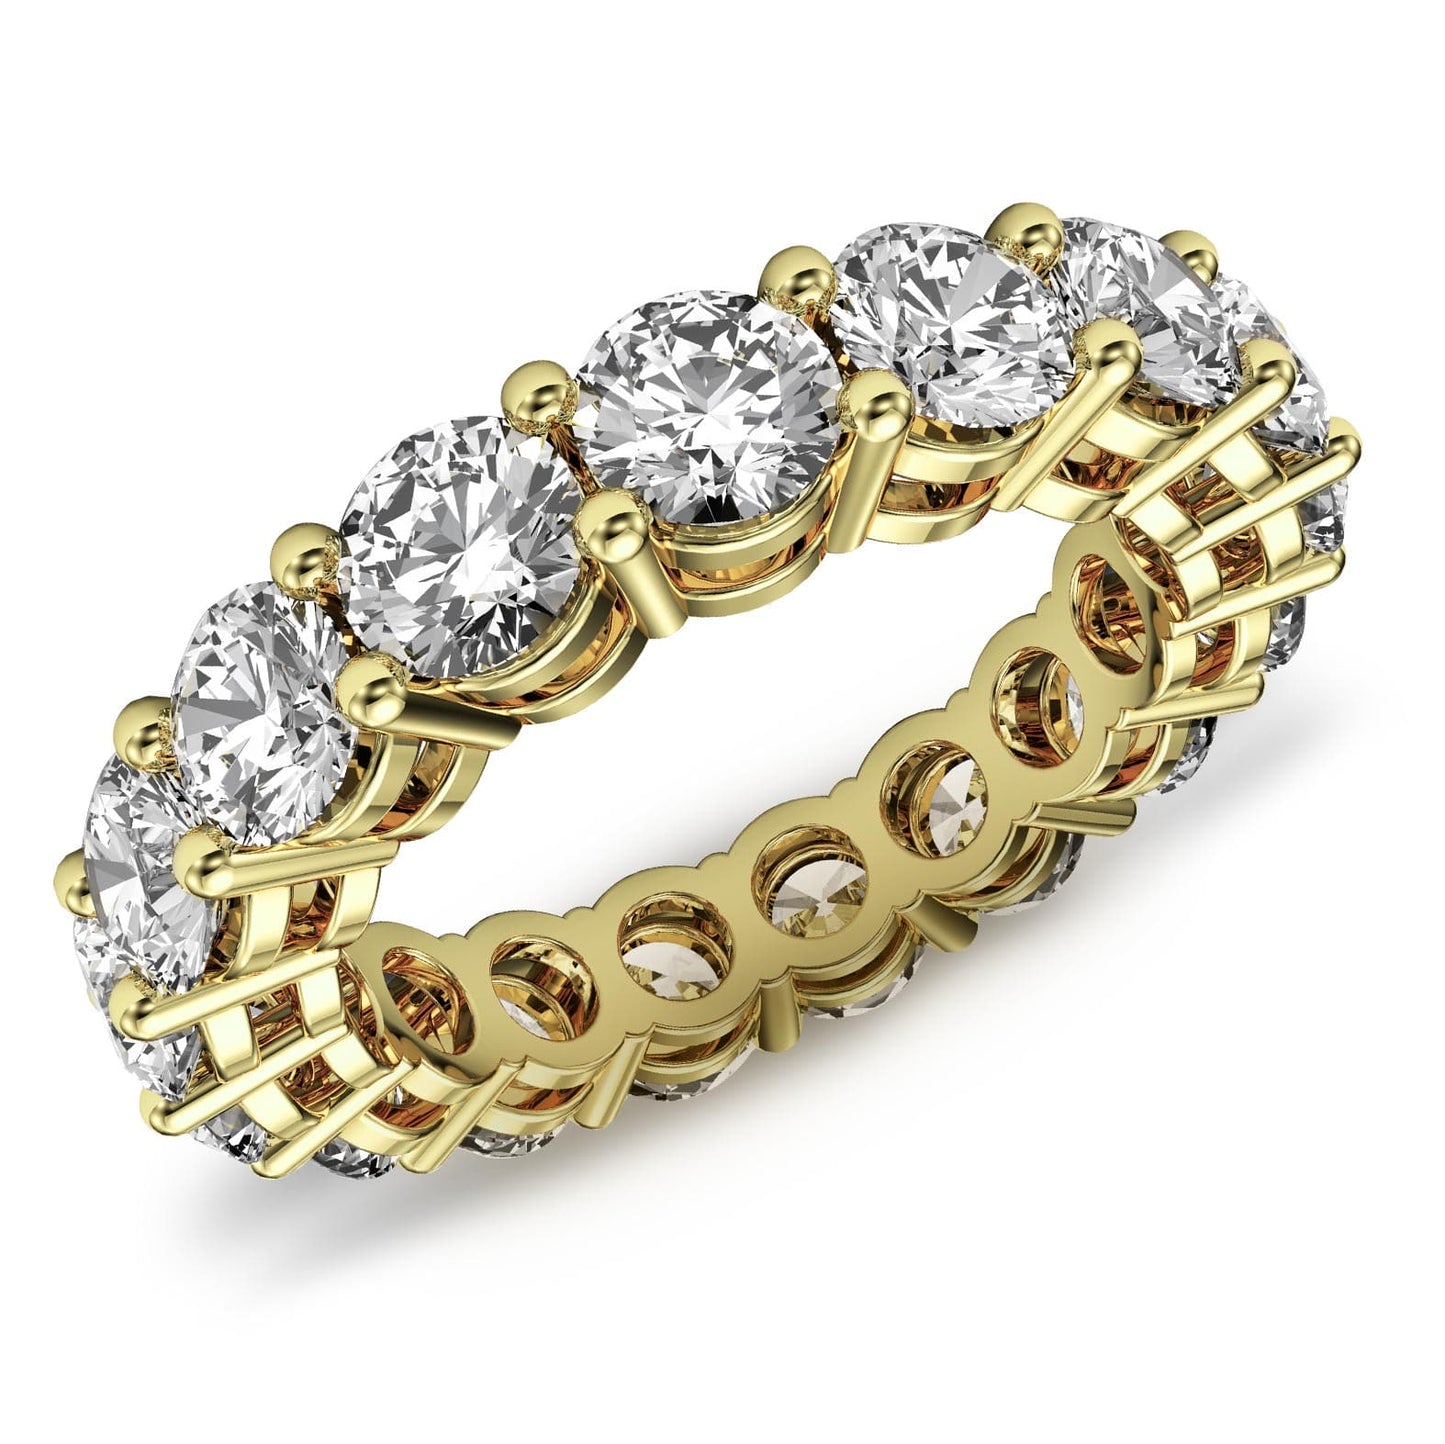 4ct Shared Prong Diamond Eternity Ring in 14k Gold